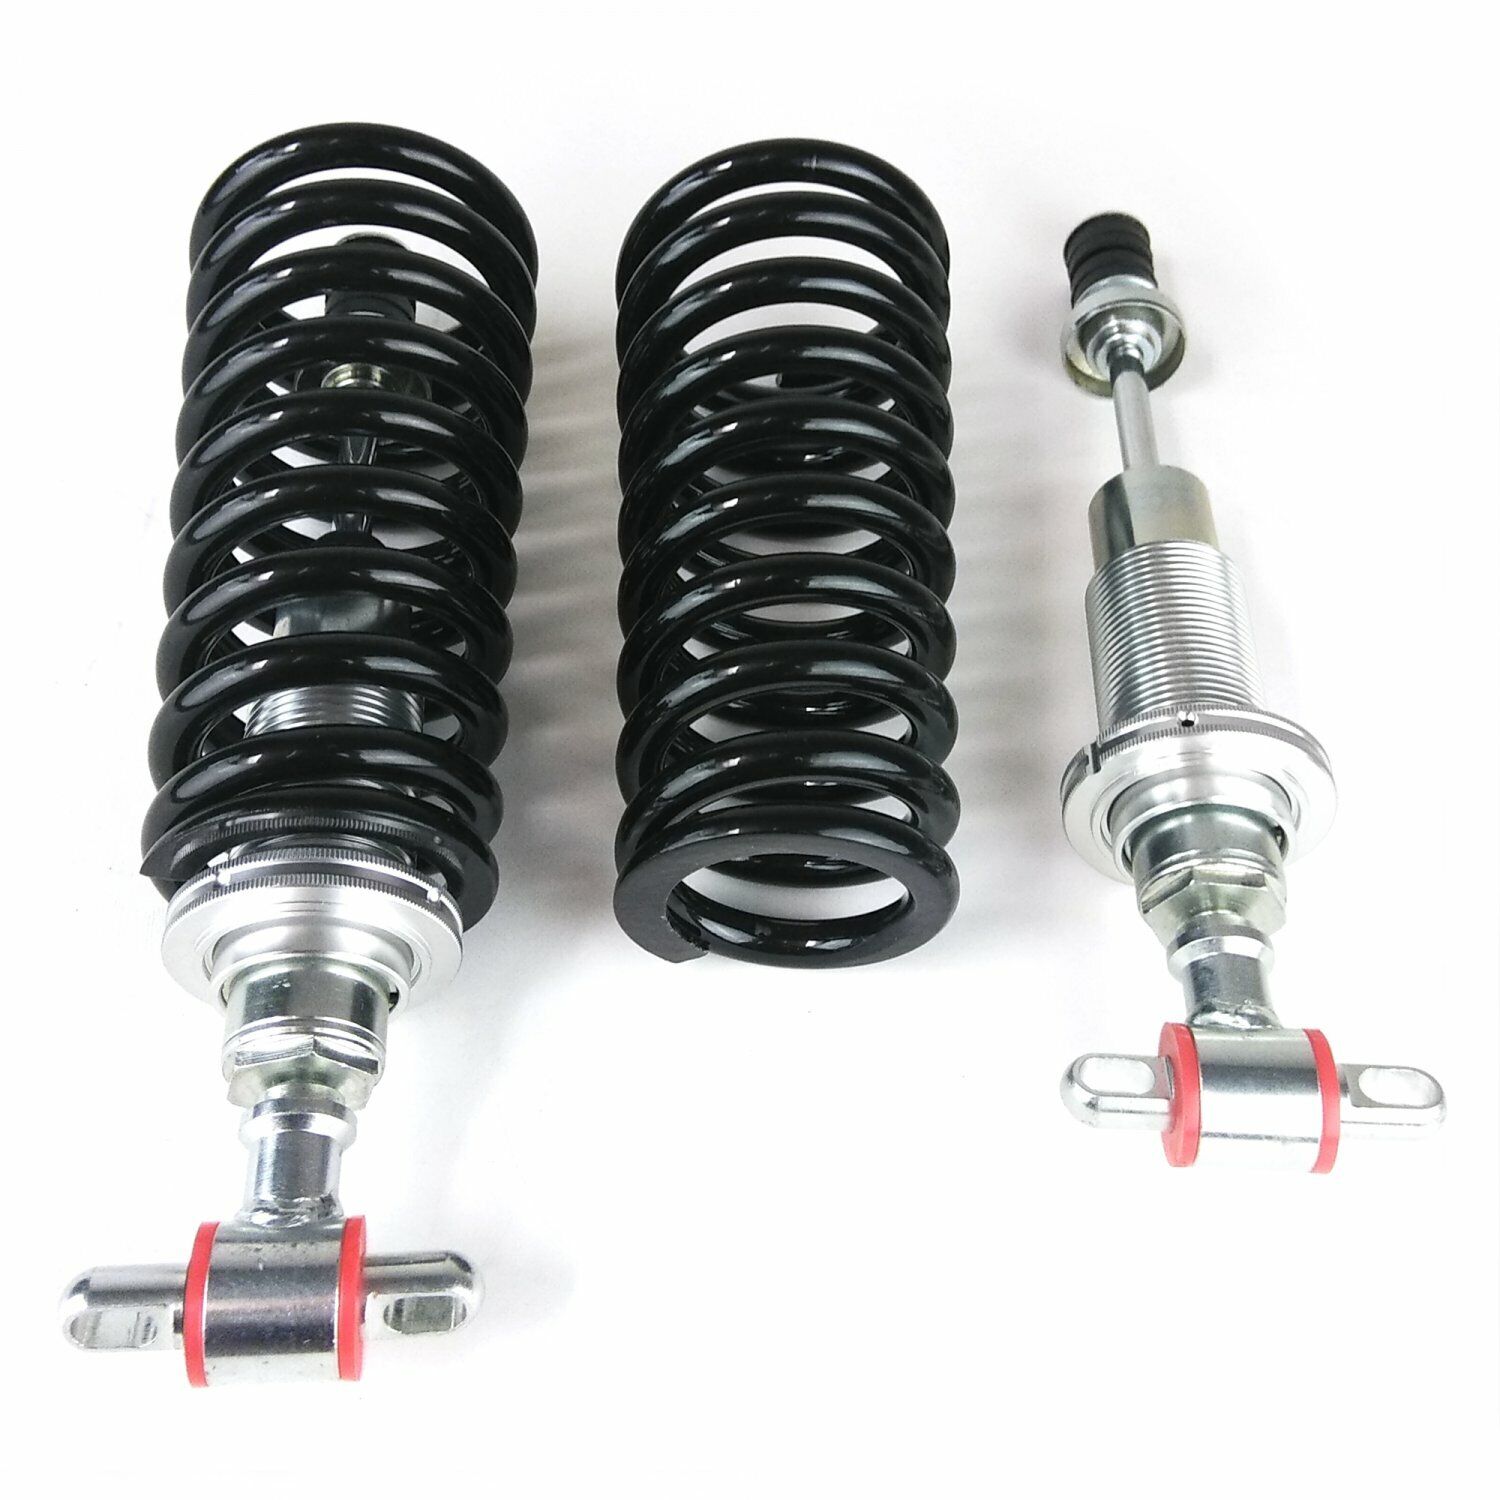 1955-57 Chevy Bel Air 700lb BBC Front Coilover Shocks Fits OE Lower Control Arms